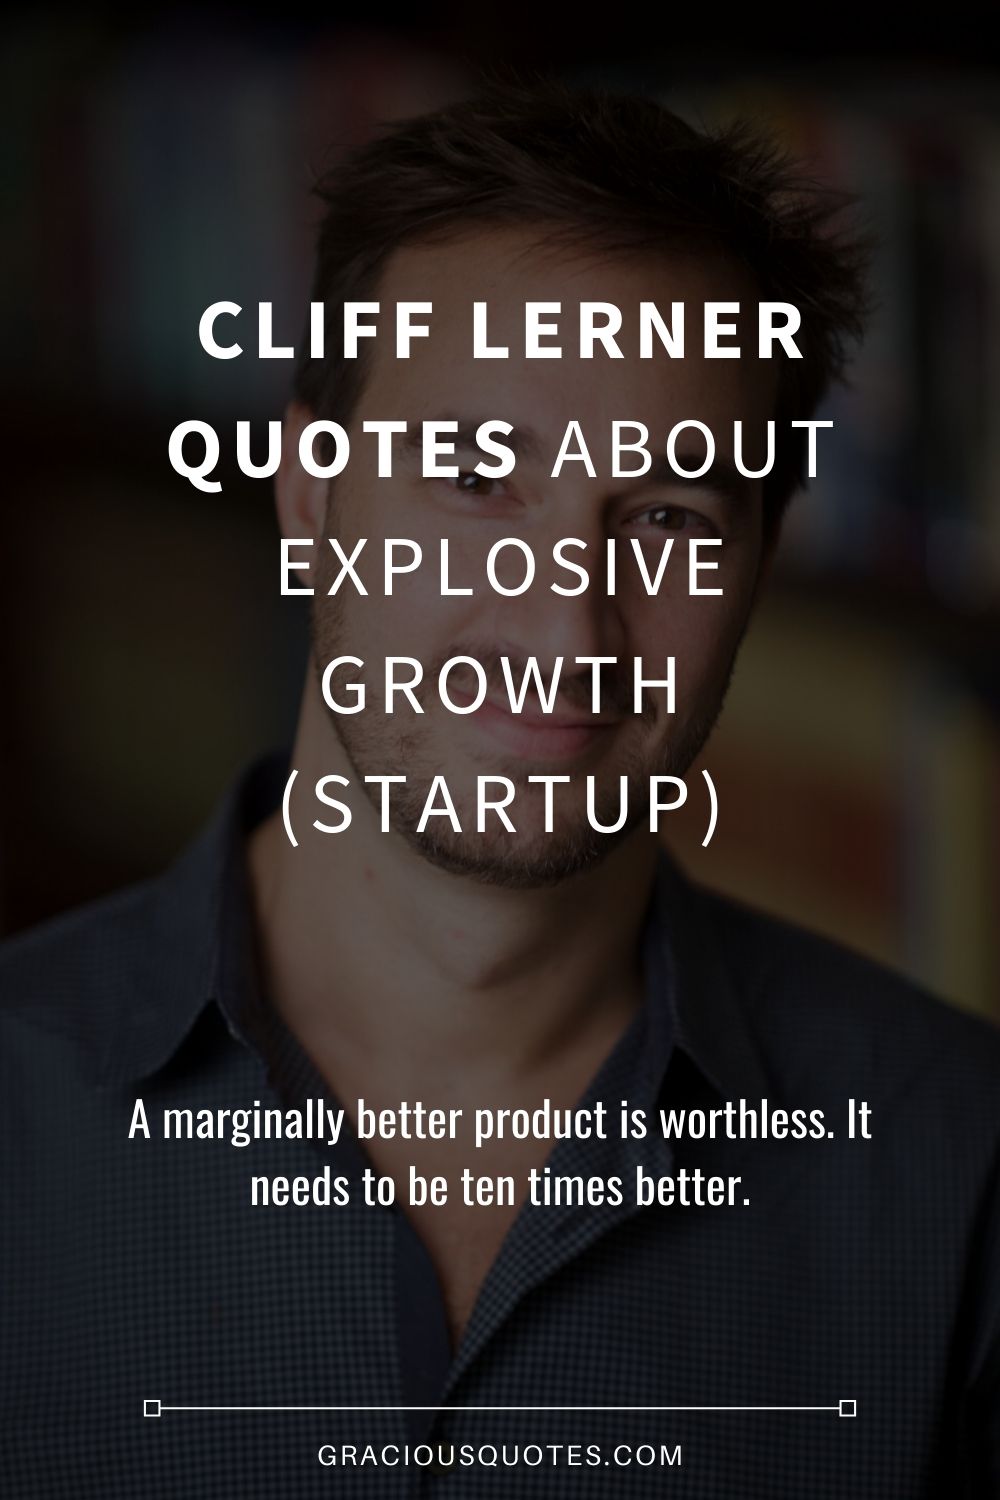 Cliff-Lerner-Quotes-About-Explosive-Growth-STARTUP-Gracious-Quotes